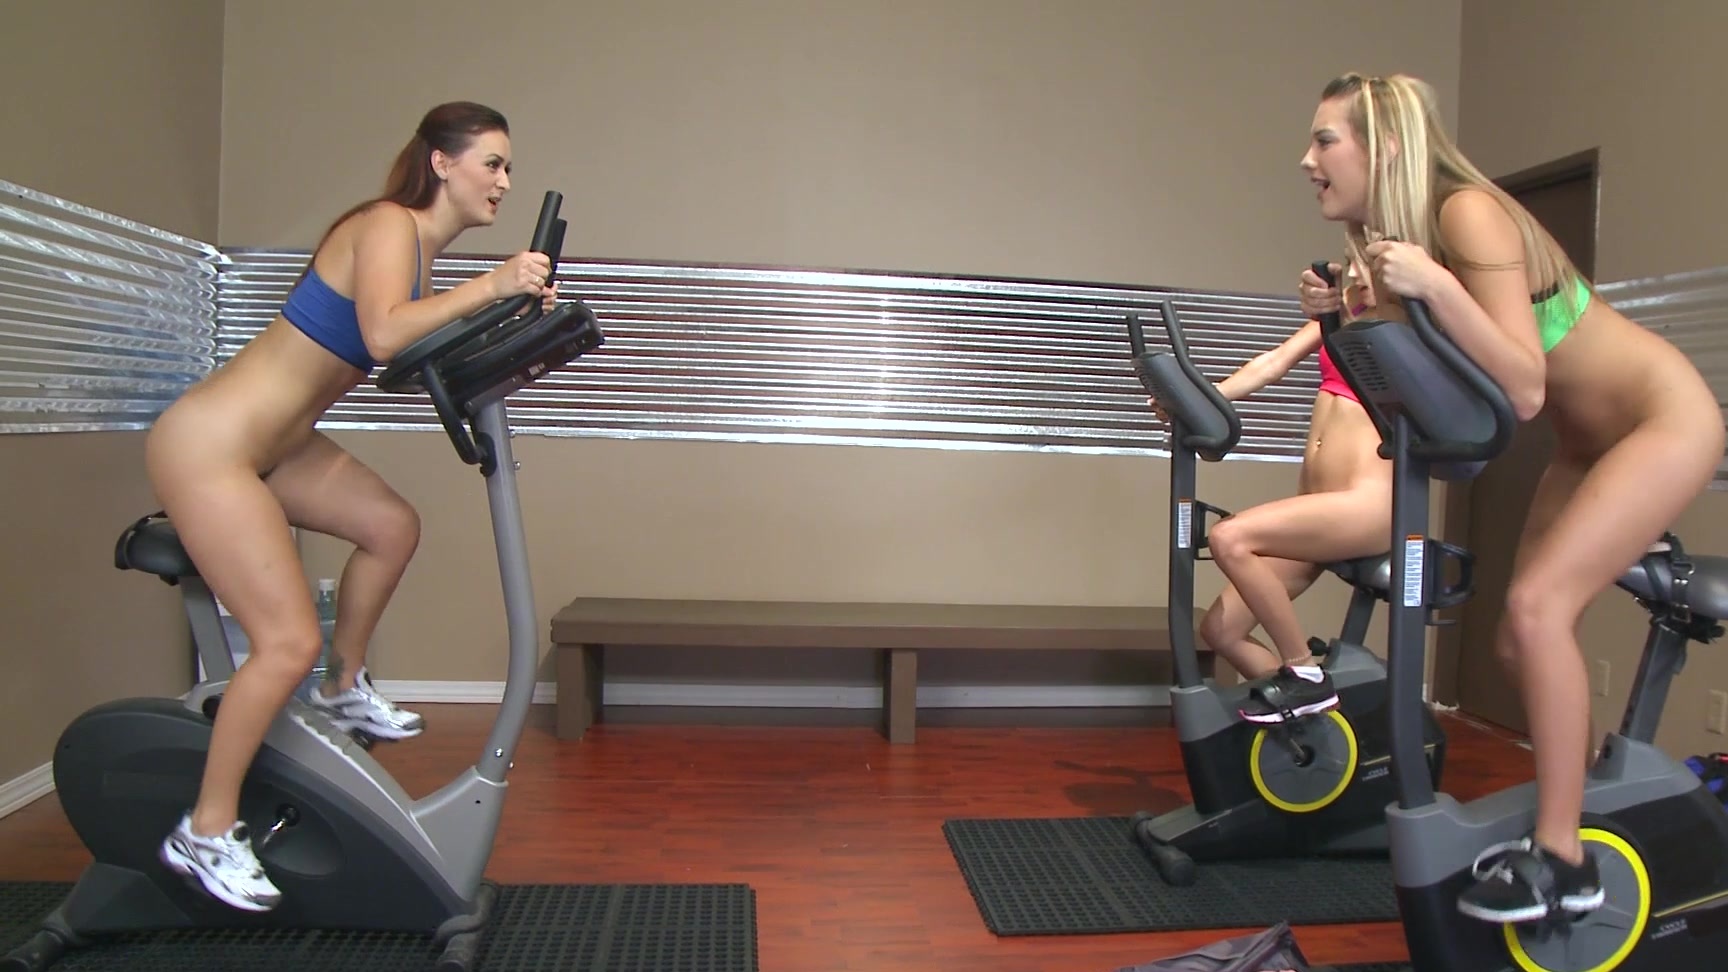 Dildo ride workout before lesbian threesome with Kenna James ...